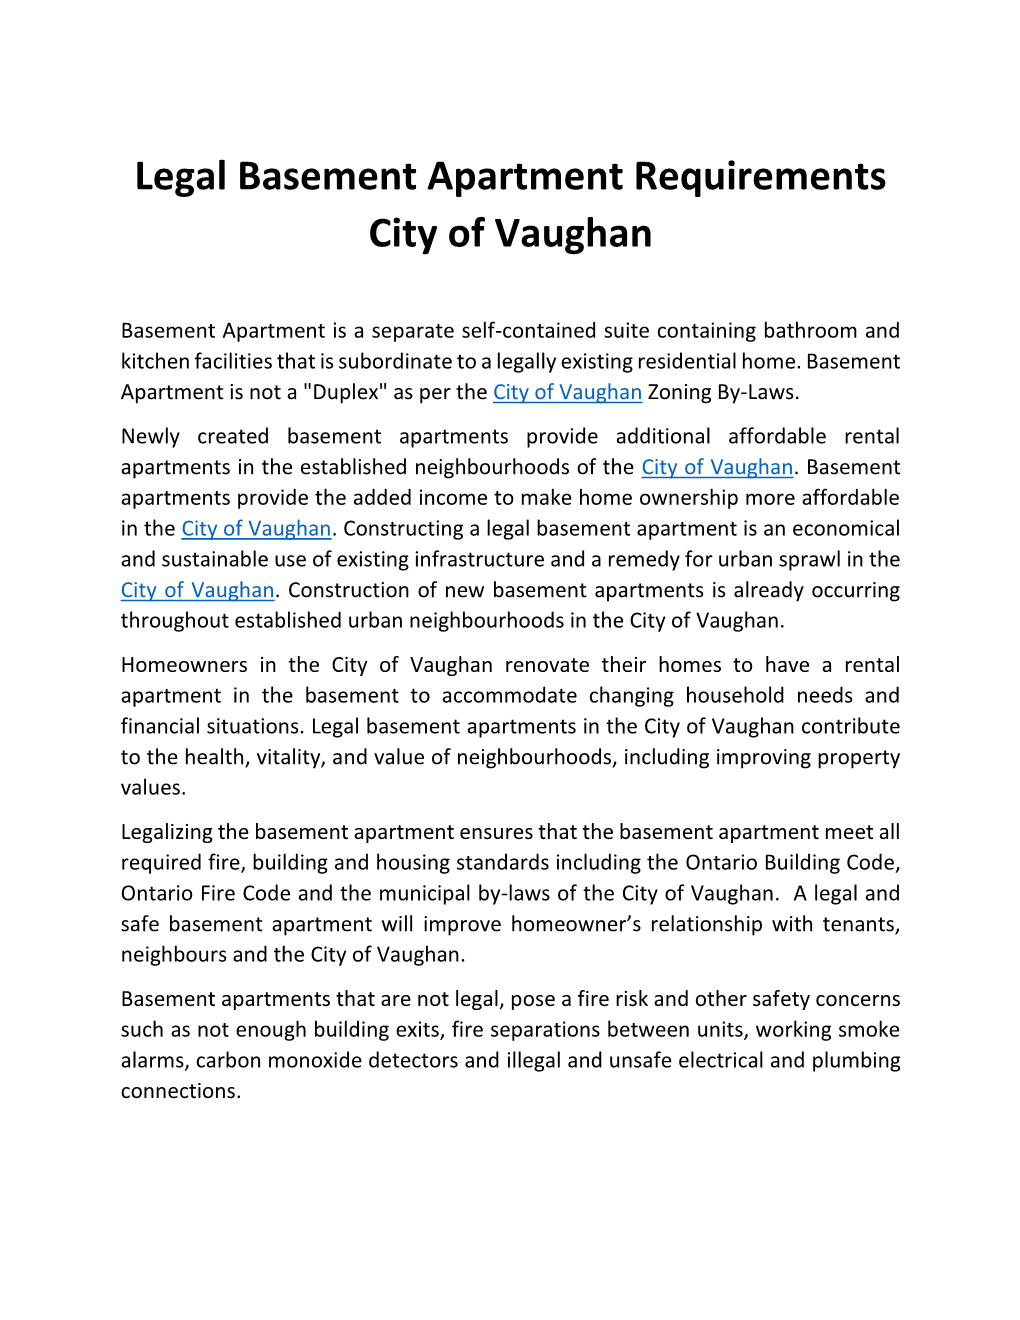 Legal Basement Apartment Requirements City of Vaughan